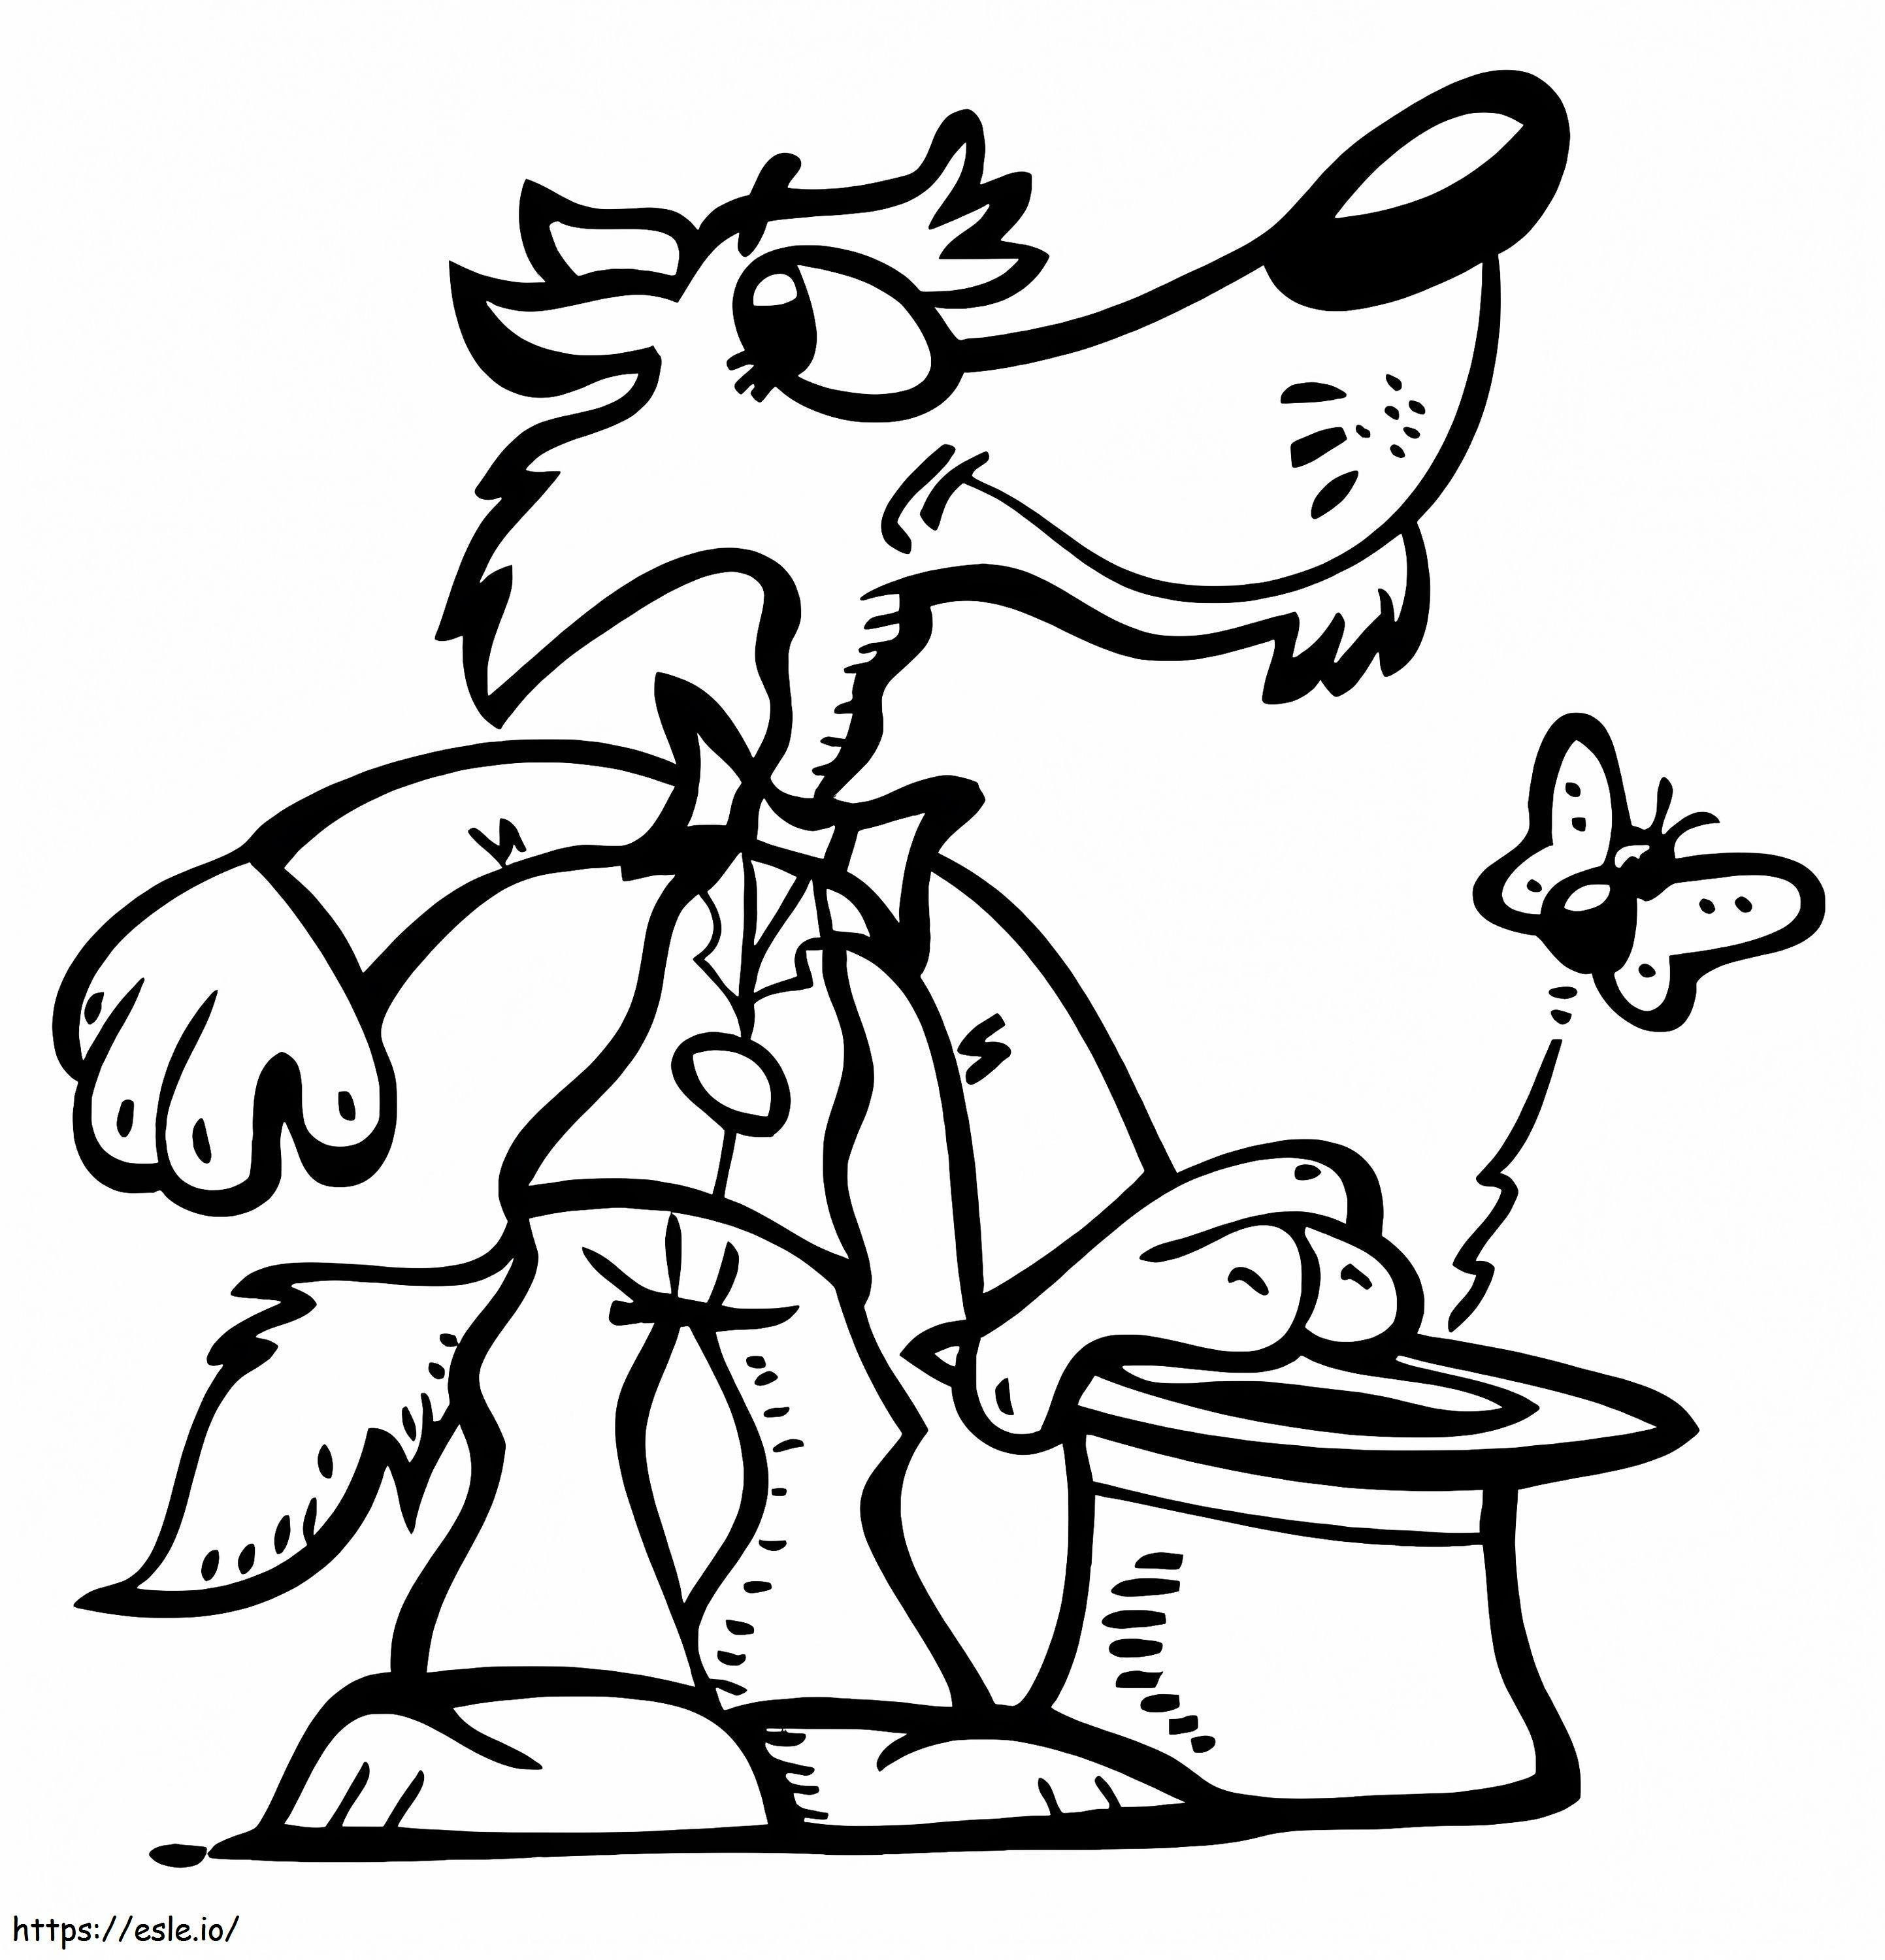 Magician Wolf coloring page